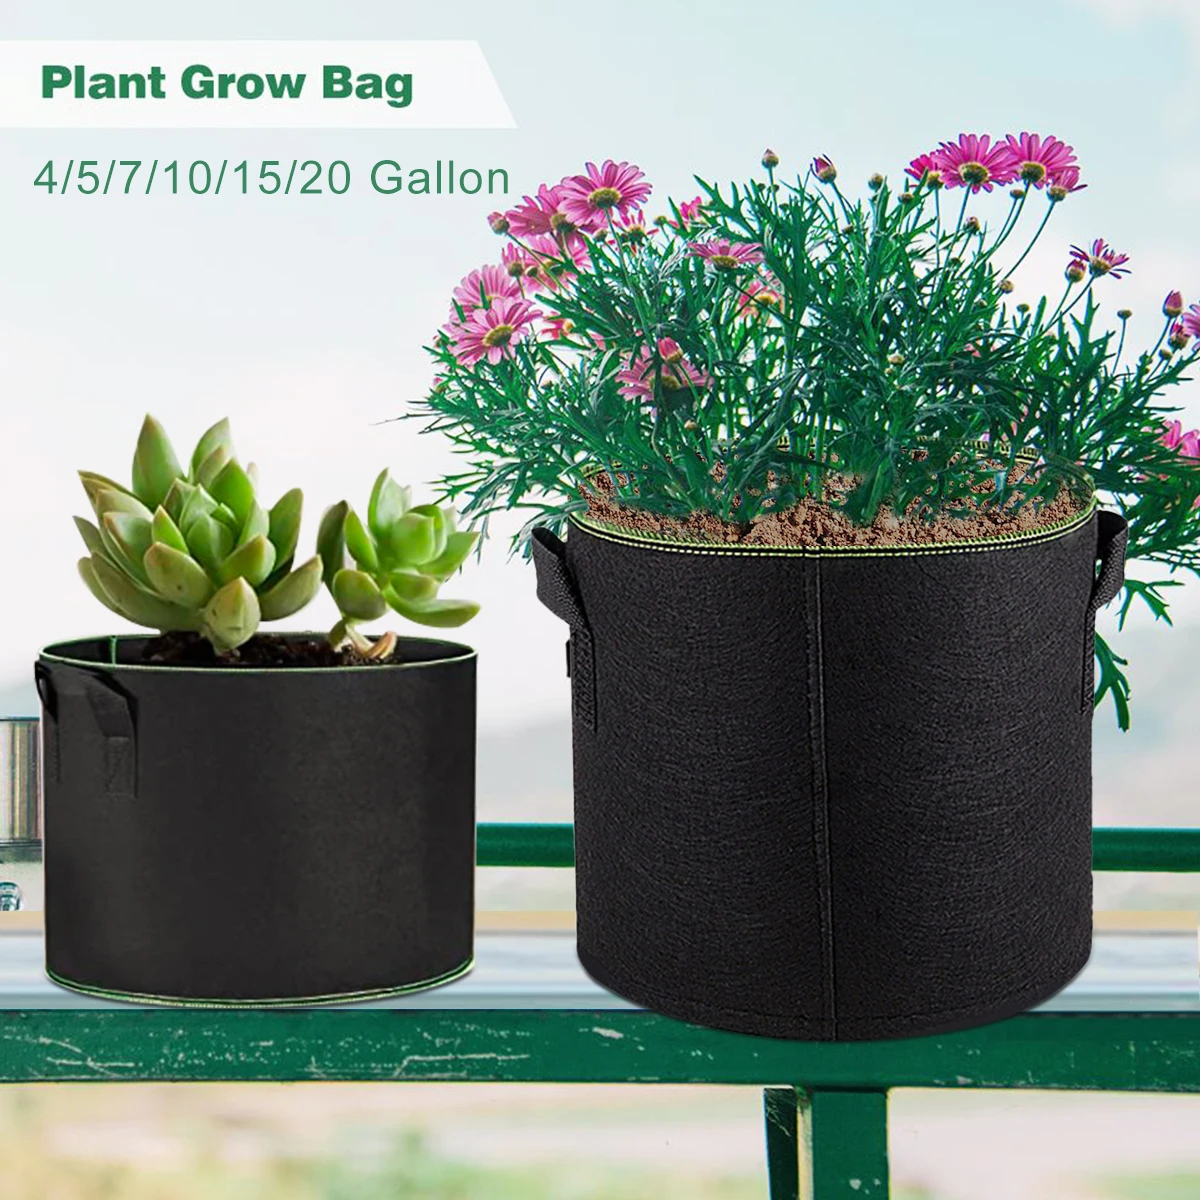 

5Pcs 4/5/7/10/15/20 Gallon Grow Bags Nonwoven Plant Fabric Pots with Handles for Garden Vegetable Flower Plant Seedling Growing